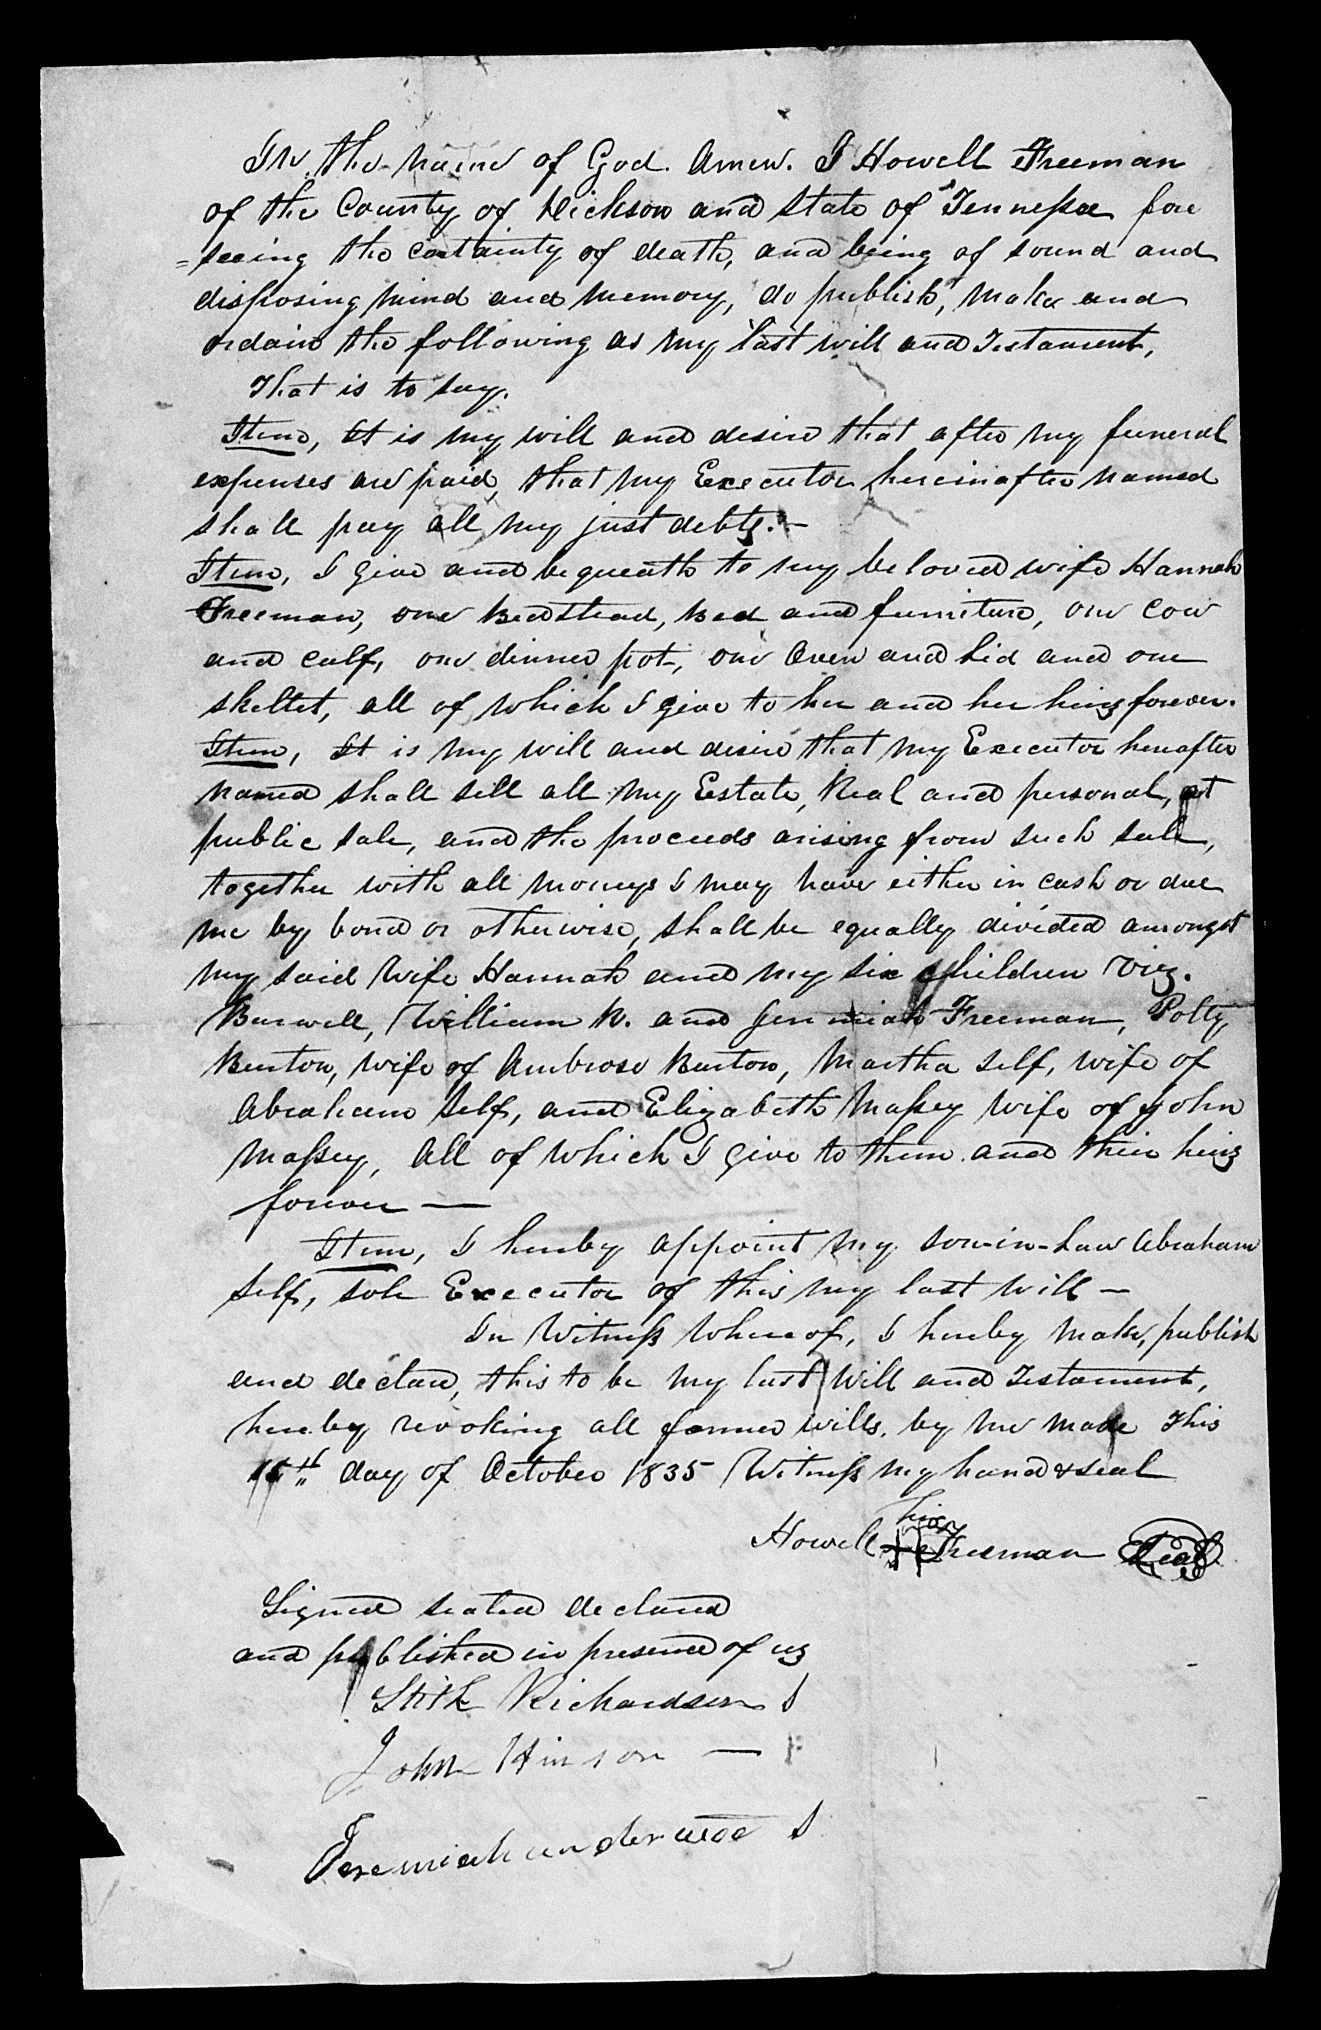 Will of Howell Freeman, husband of Hannah Freeman who is found living with Walkers in 1850 and 1860 Dickson County.